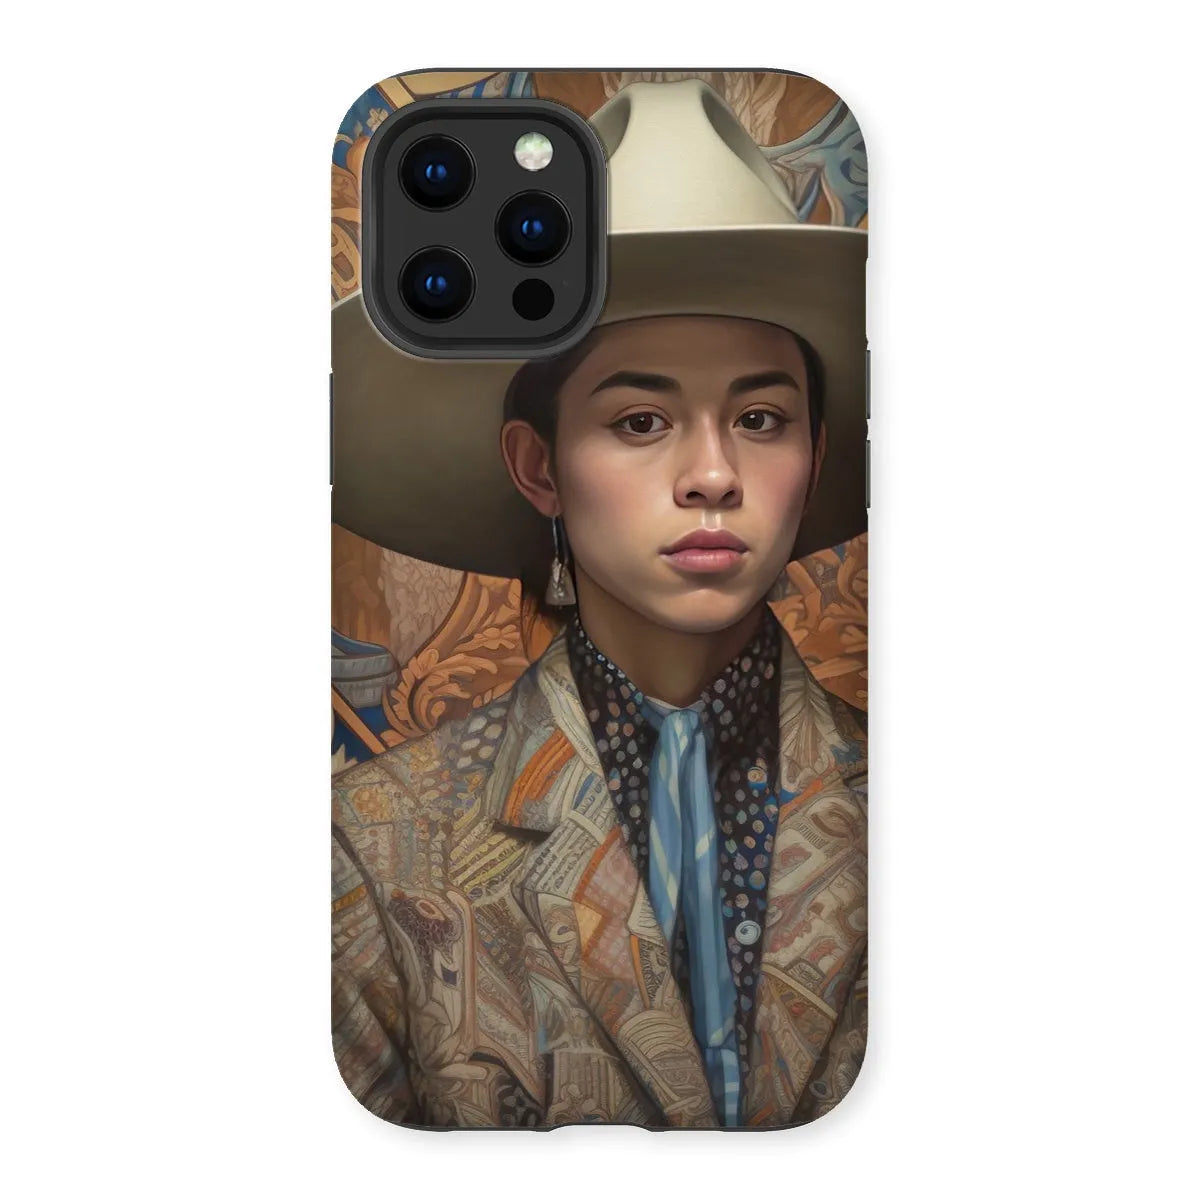 Angel The Transgender Cowboy - F2m Outlaw Art Phone Case - Iphone 12 Pro Max / Matte - Mobile Phone Cases - Aesthetic